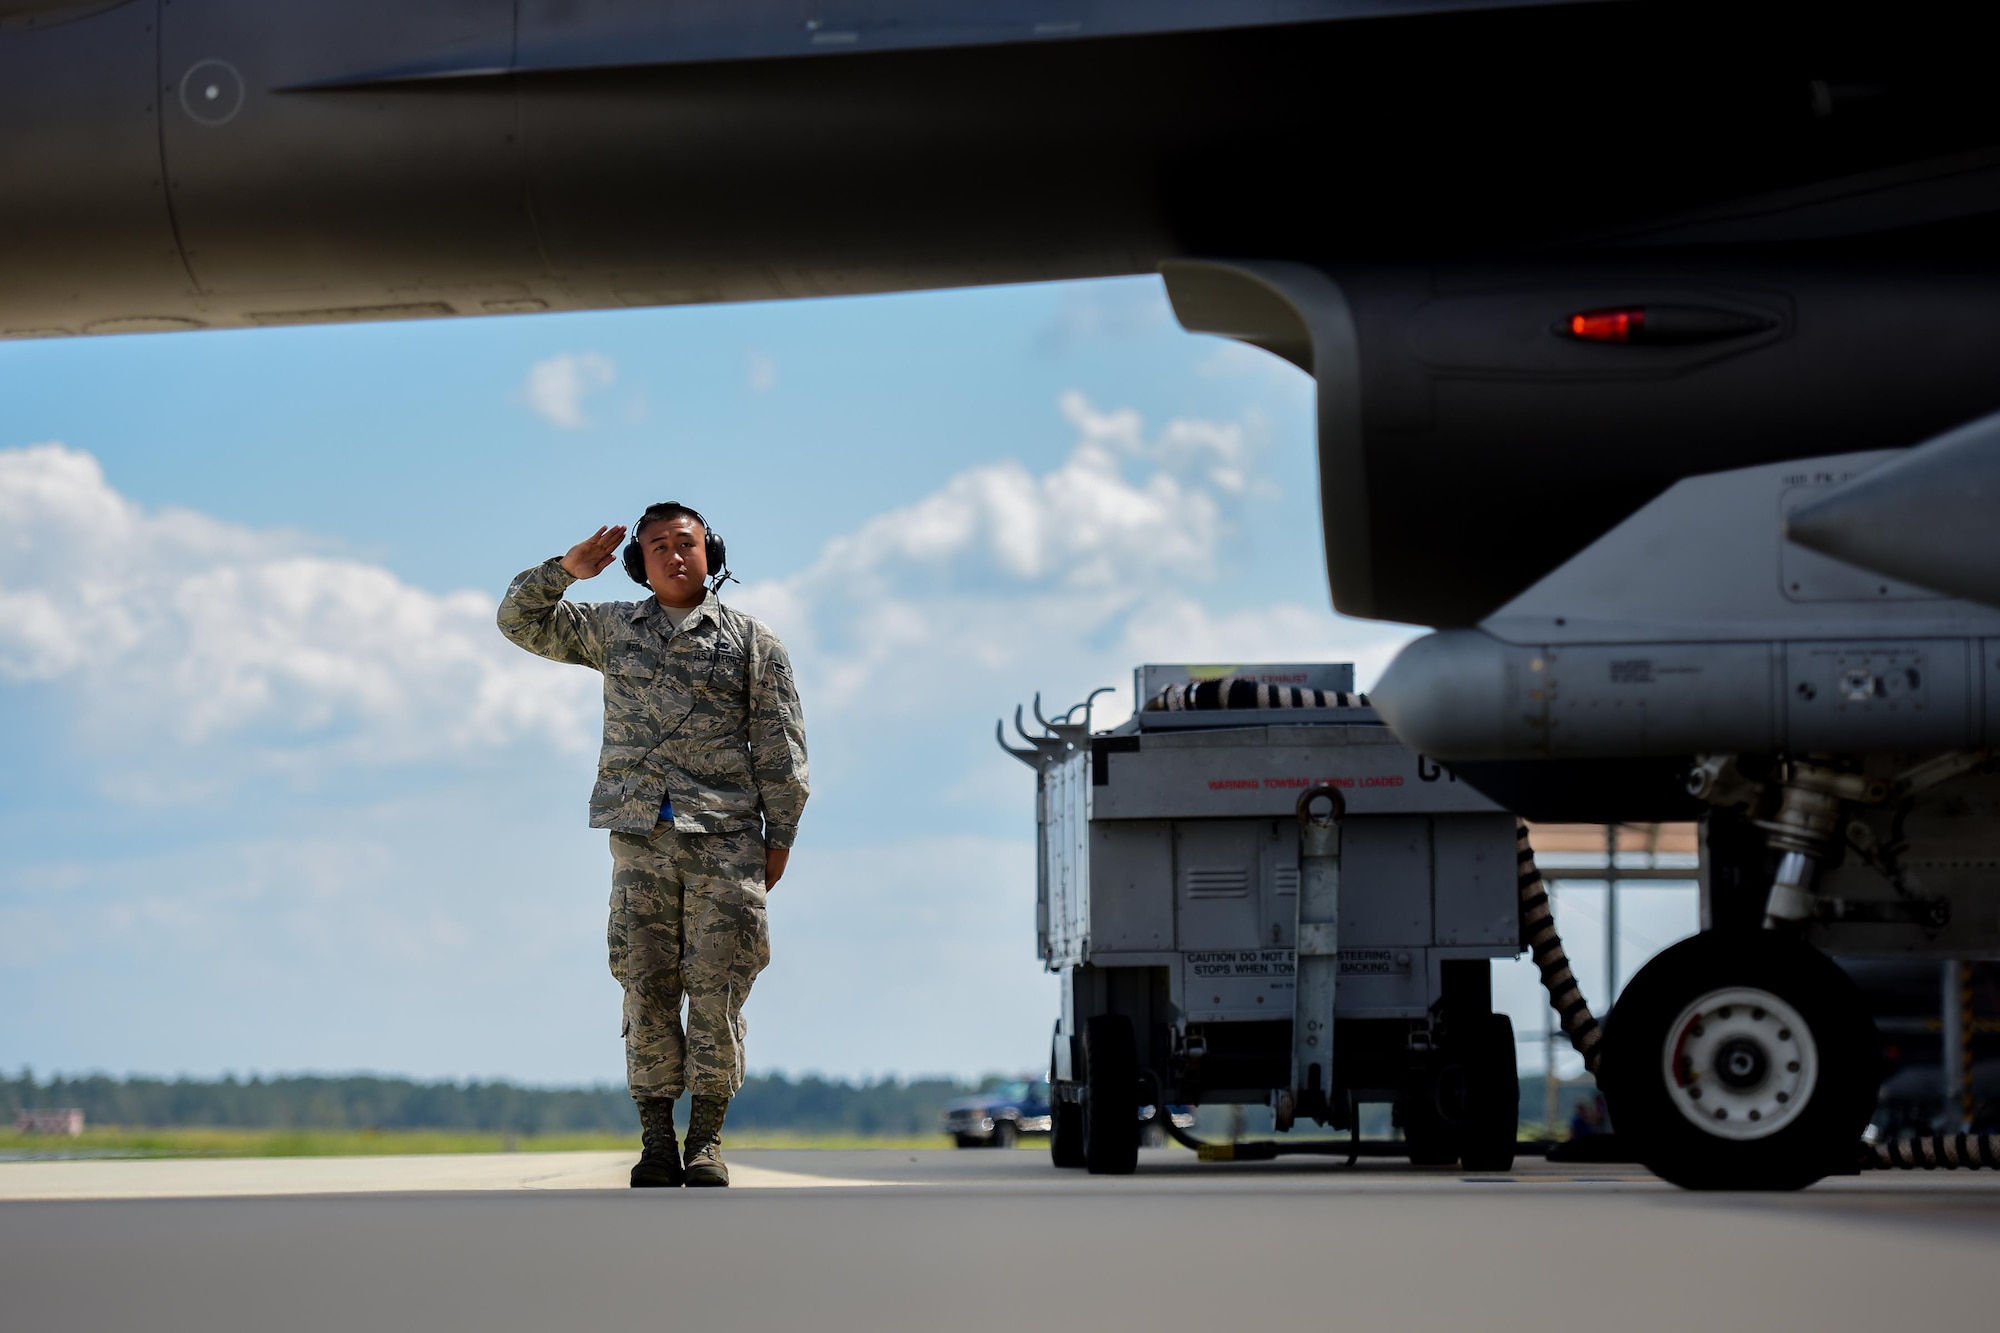 U.S. Airman 1st Class Luke Ikeda, a crew chief assigned to the 169th Aircraft Maintenance Squadron, salutes a F-16 Fighting Falcon fighter pilot assigned to the South Carolina Air National Guard’s 169th Fighter Wing at McEntire Joint National Guard Base, S.C., Sept. 16, 2017. Ikdea was recognized as an outstanding Airman by his supervisors and his peers and was the Airman Spotlight subject for the month of October. (U.S. Air National Guard photo by Senior Airman Megan Floyd)